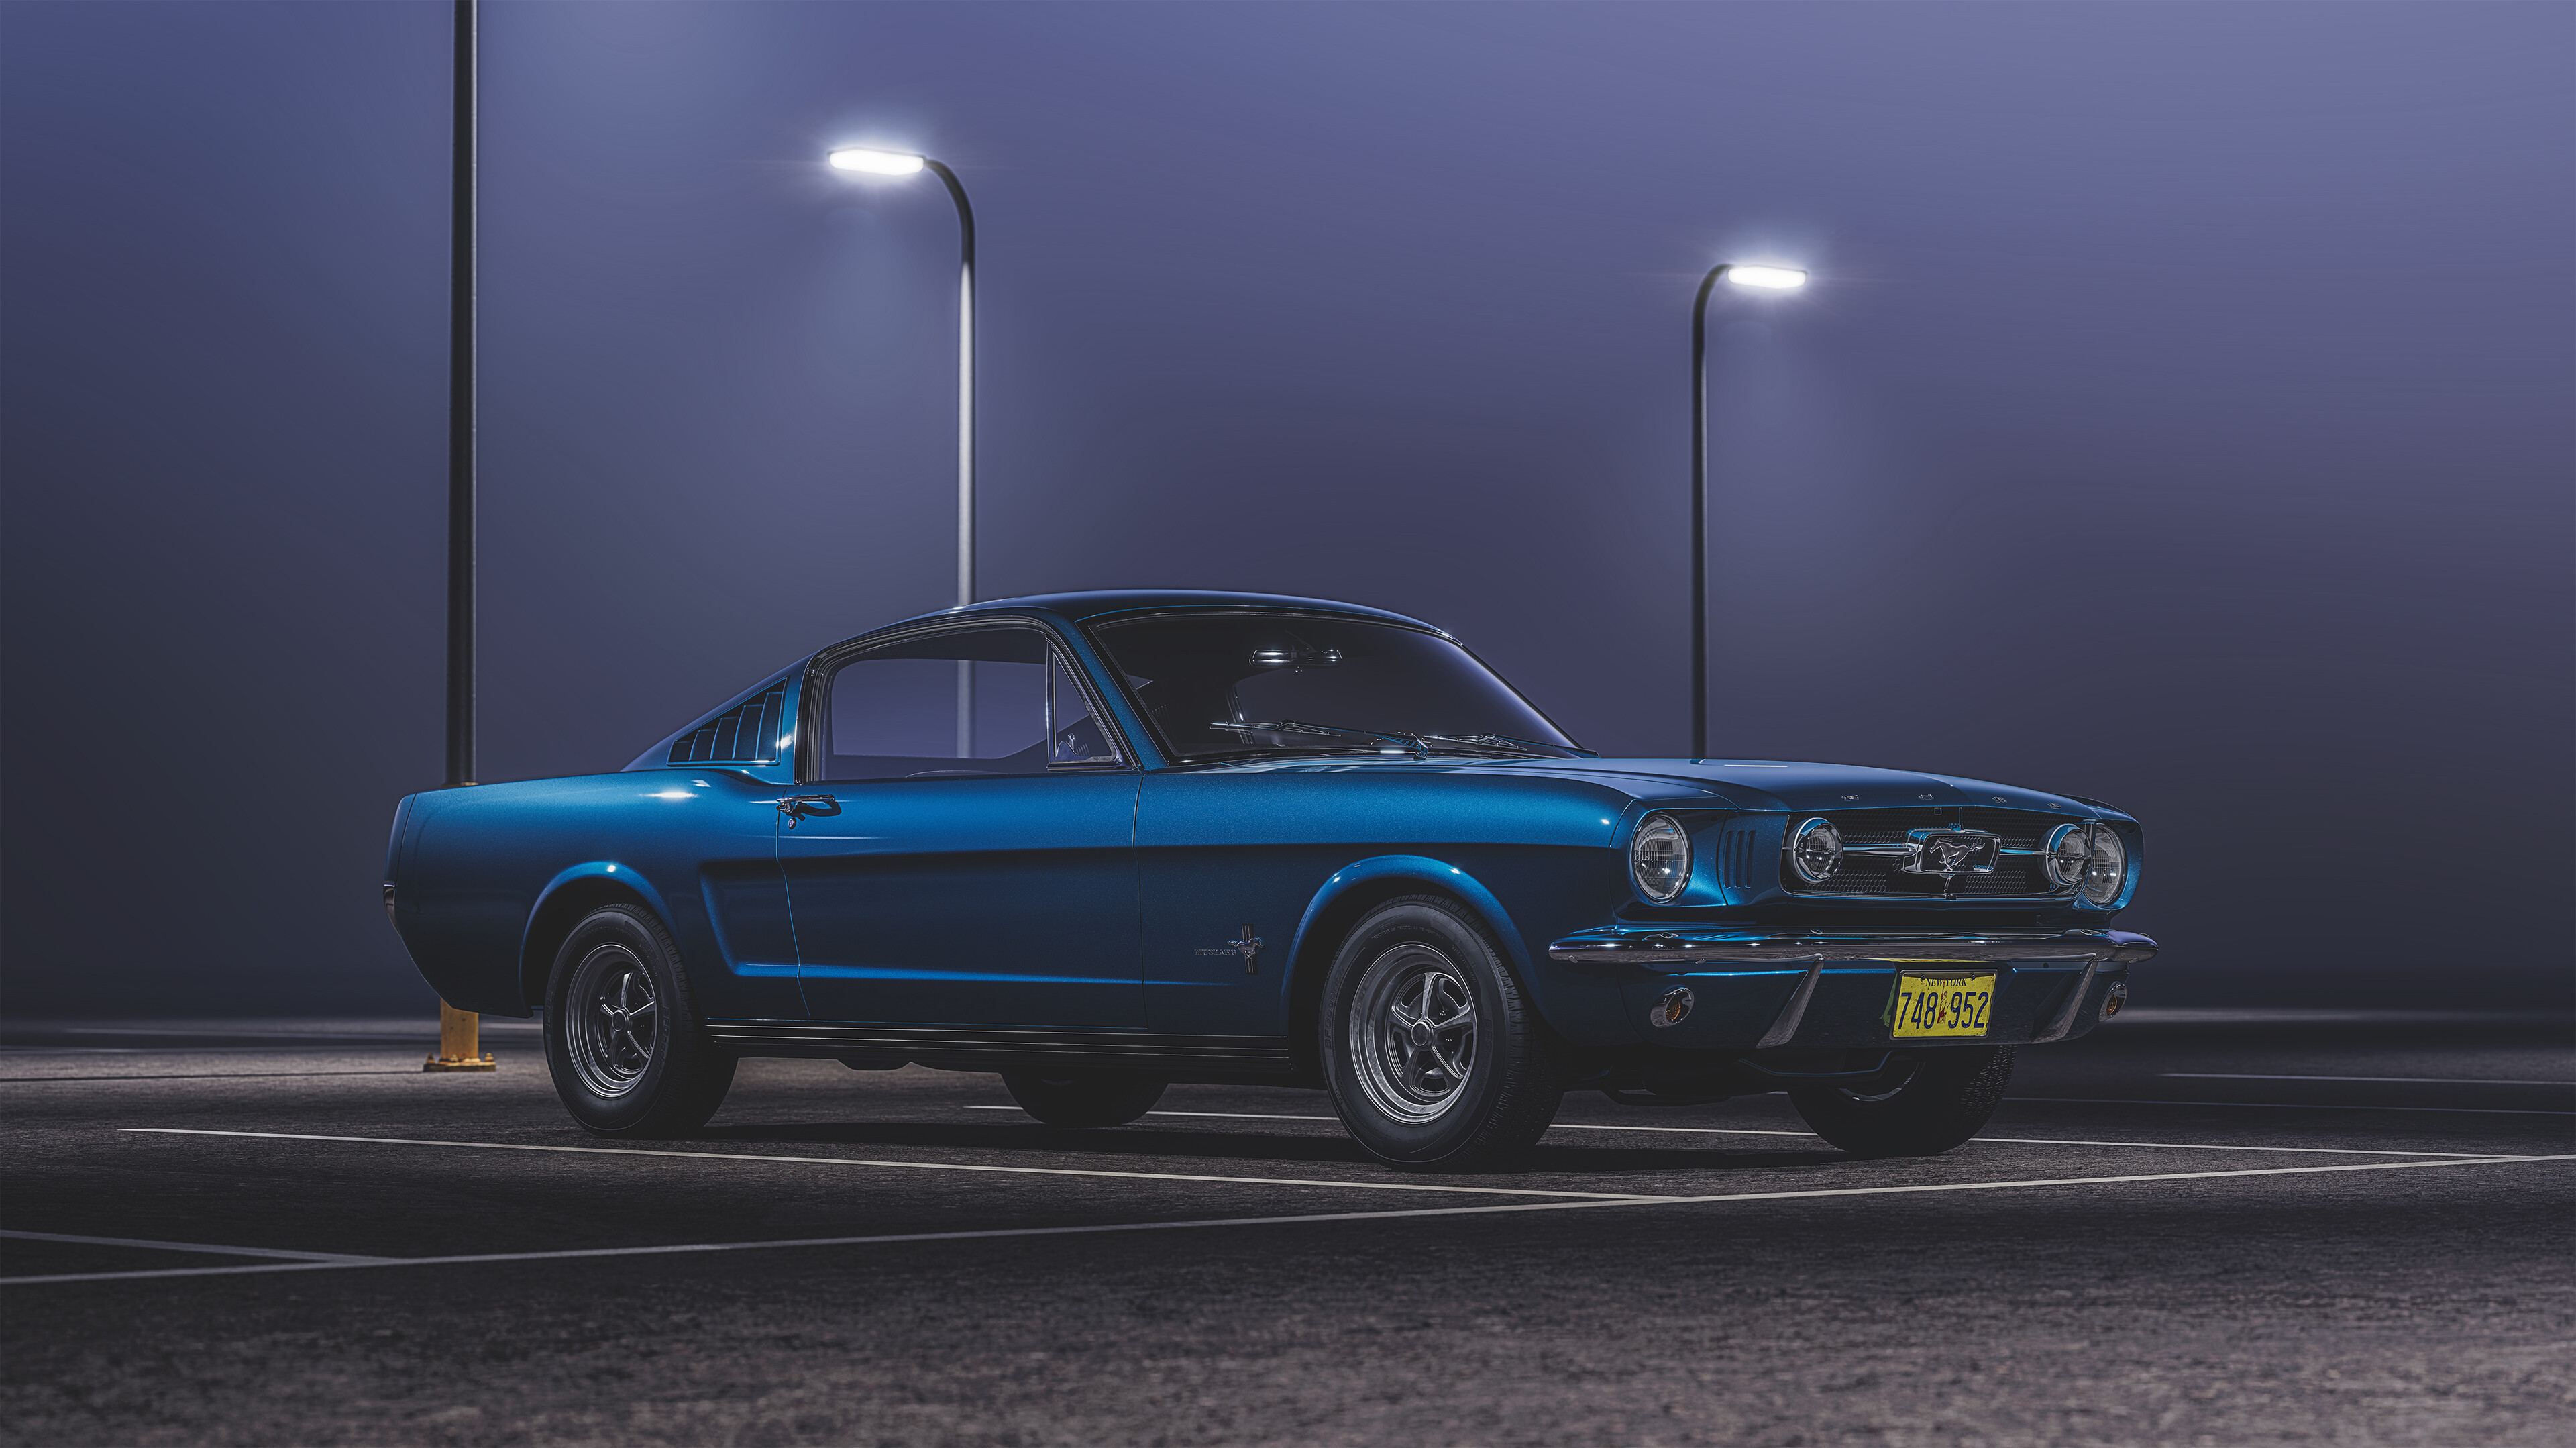 Ford: An American auto manufacturer, Mustang 1965, Vintage cars. 3840x2160 HD Wallpaper.